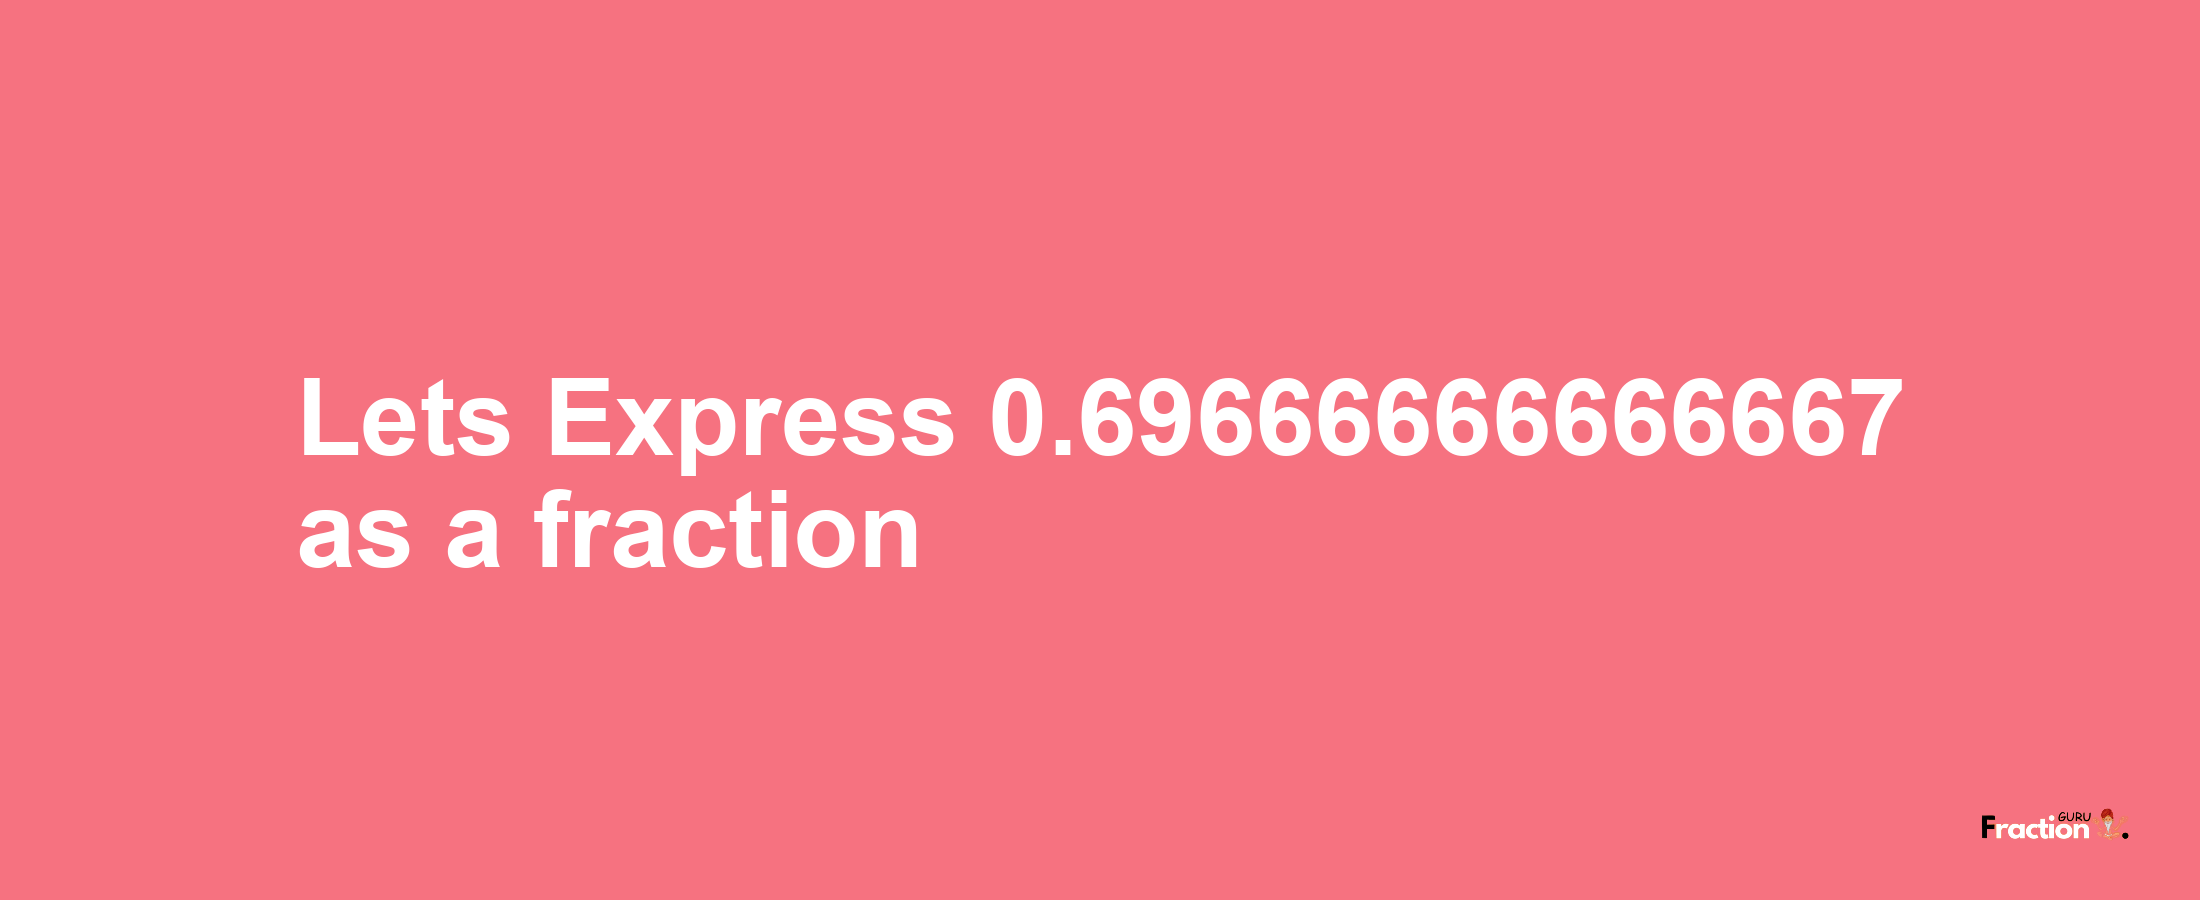 Lets Express 0.69666666666667 as afraction